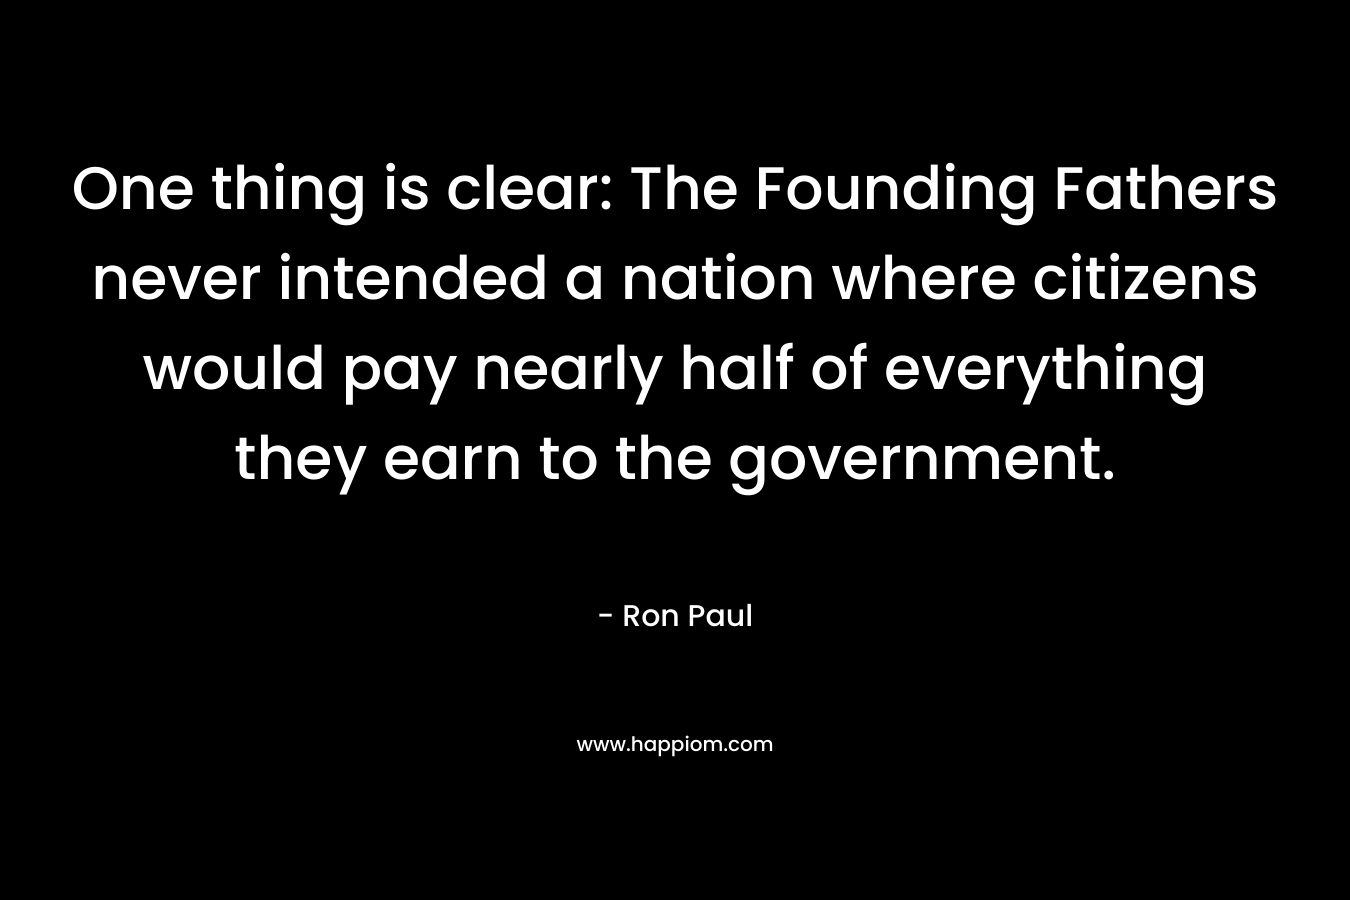 One thing is clear: The Founding Fathers never intended a nation where citizens would pay nearly half of everything they earn to the government.